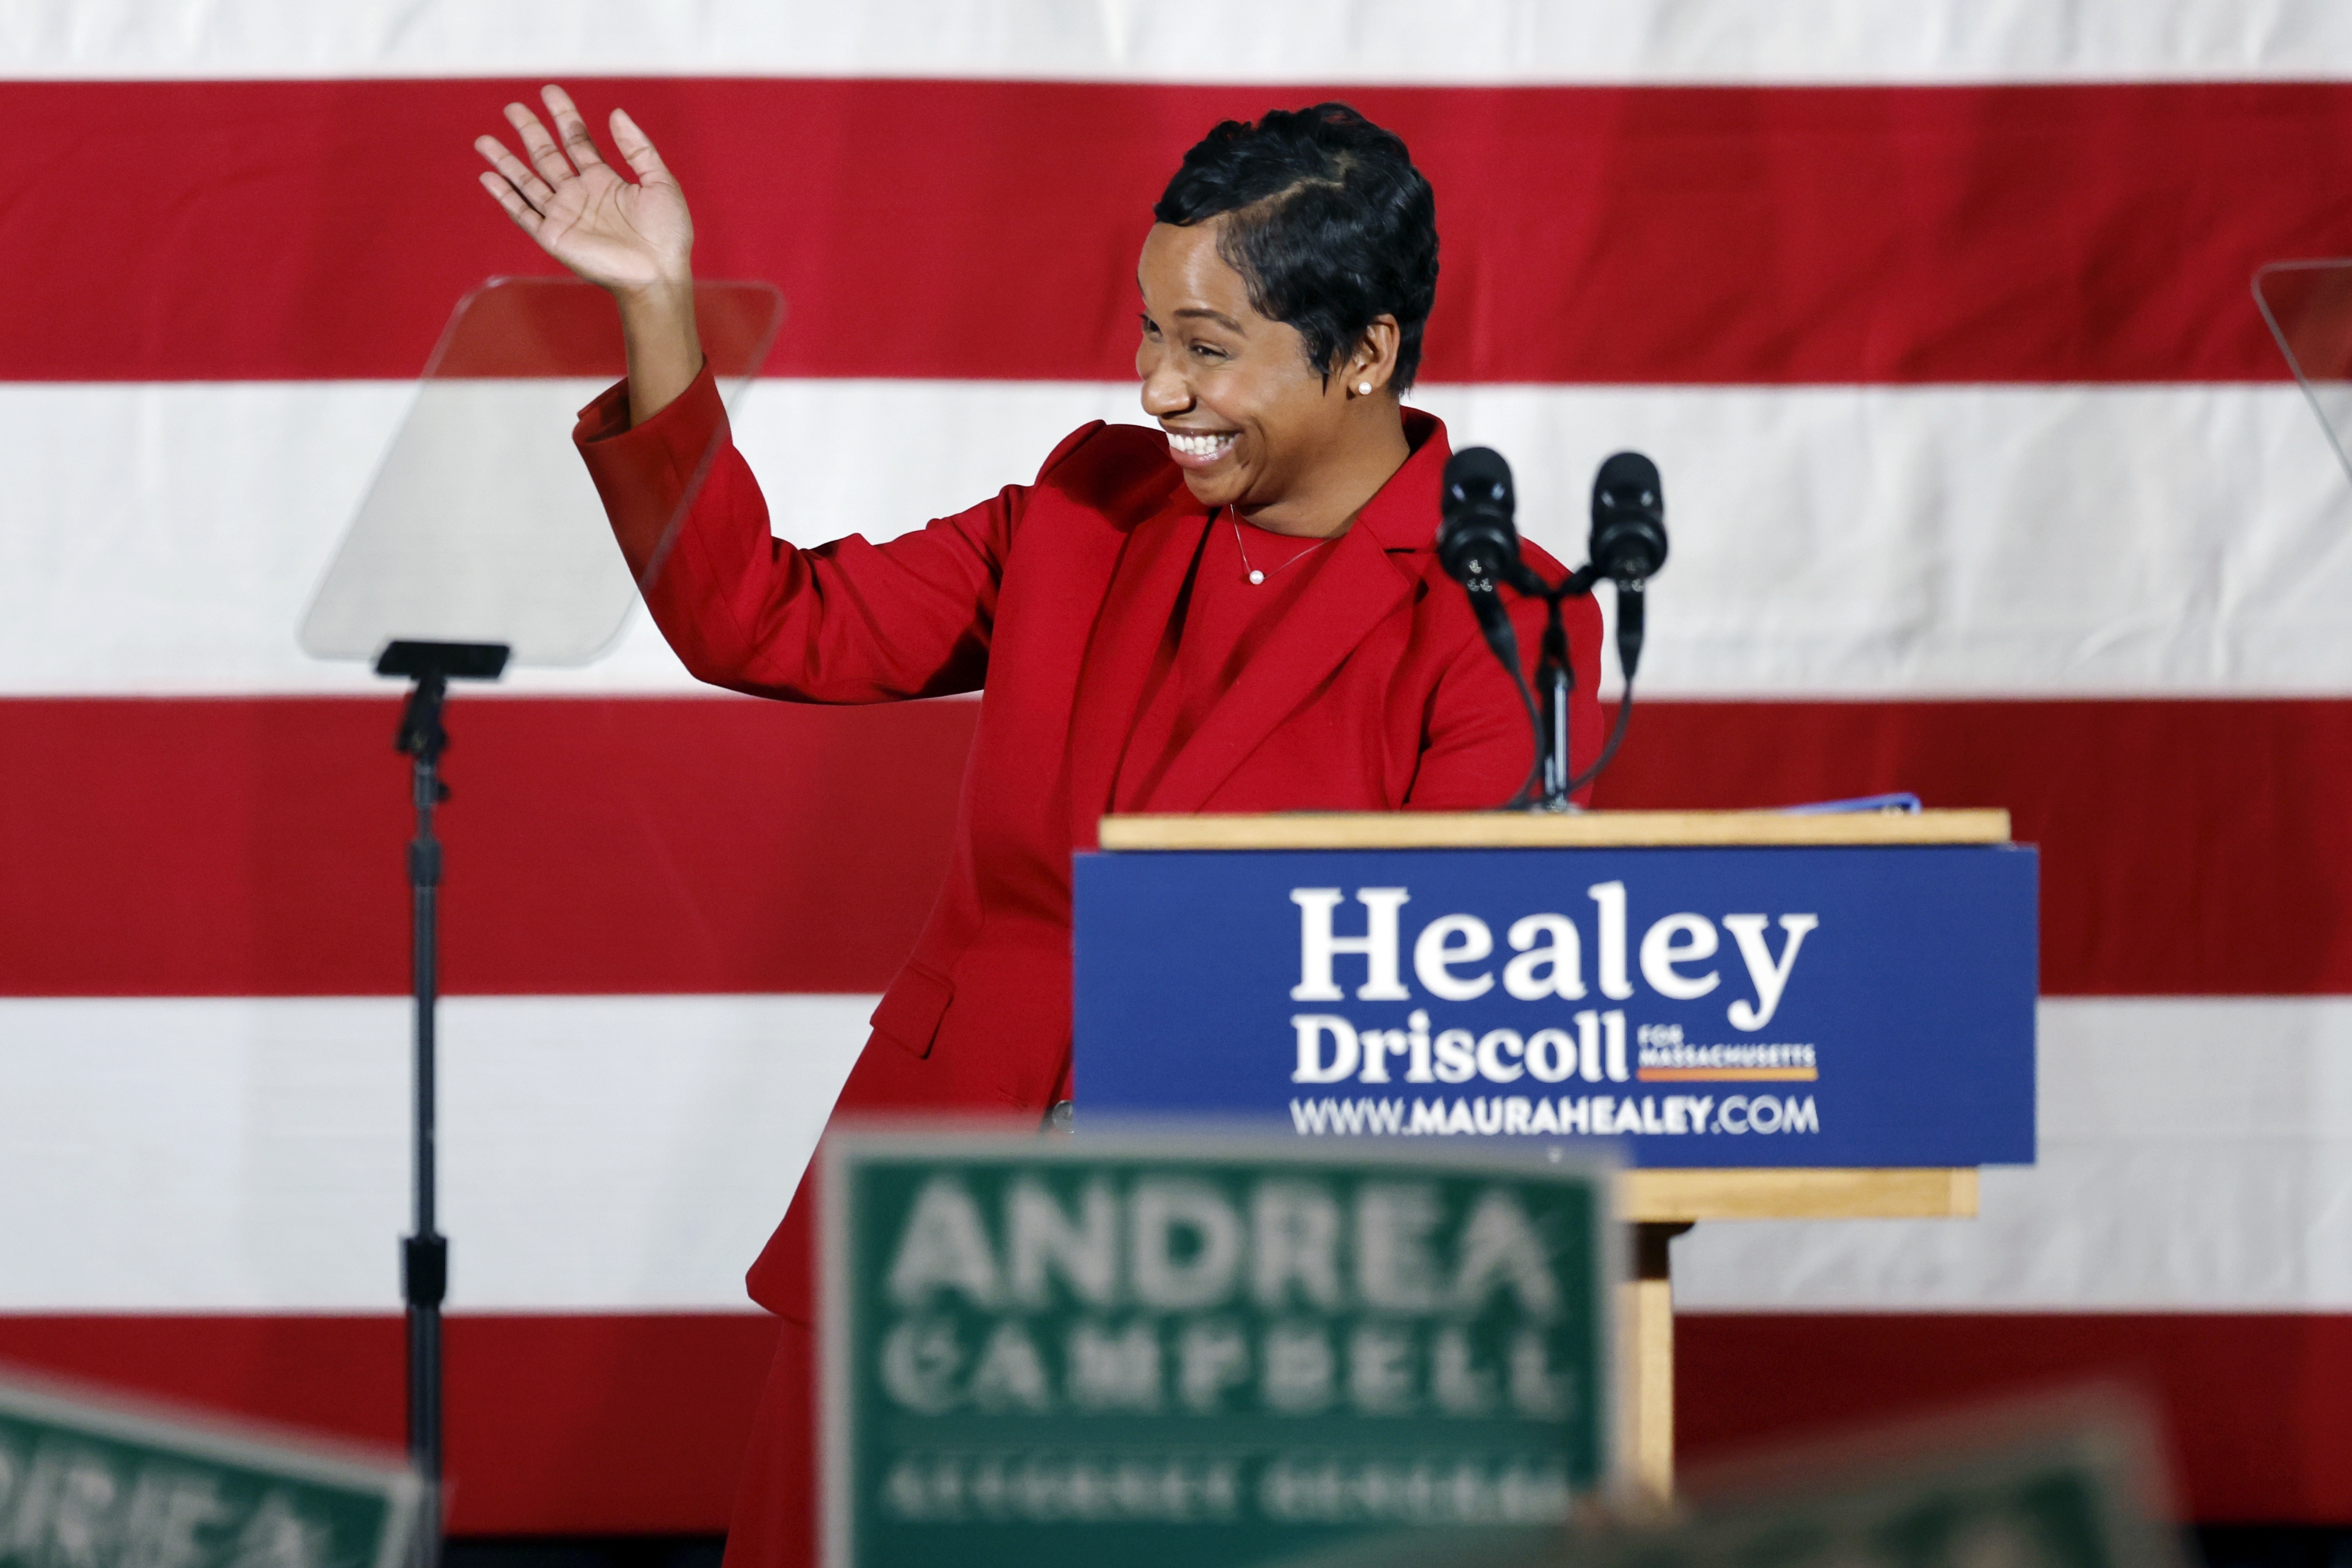 Massachusetts Attorney General-elect Andrea Campbell waves on stage during a Democratic election night party, Tuesday, Nov. 8, 2022, in Boston. (AP Photo/Michael Dwyer)